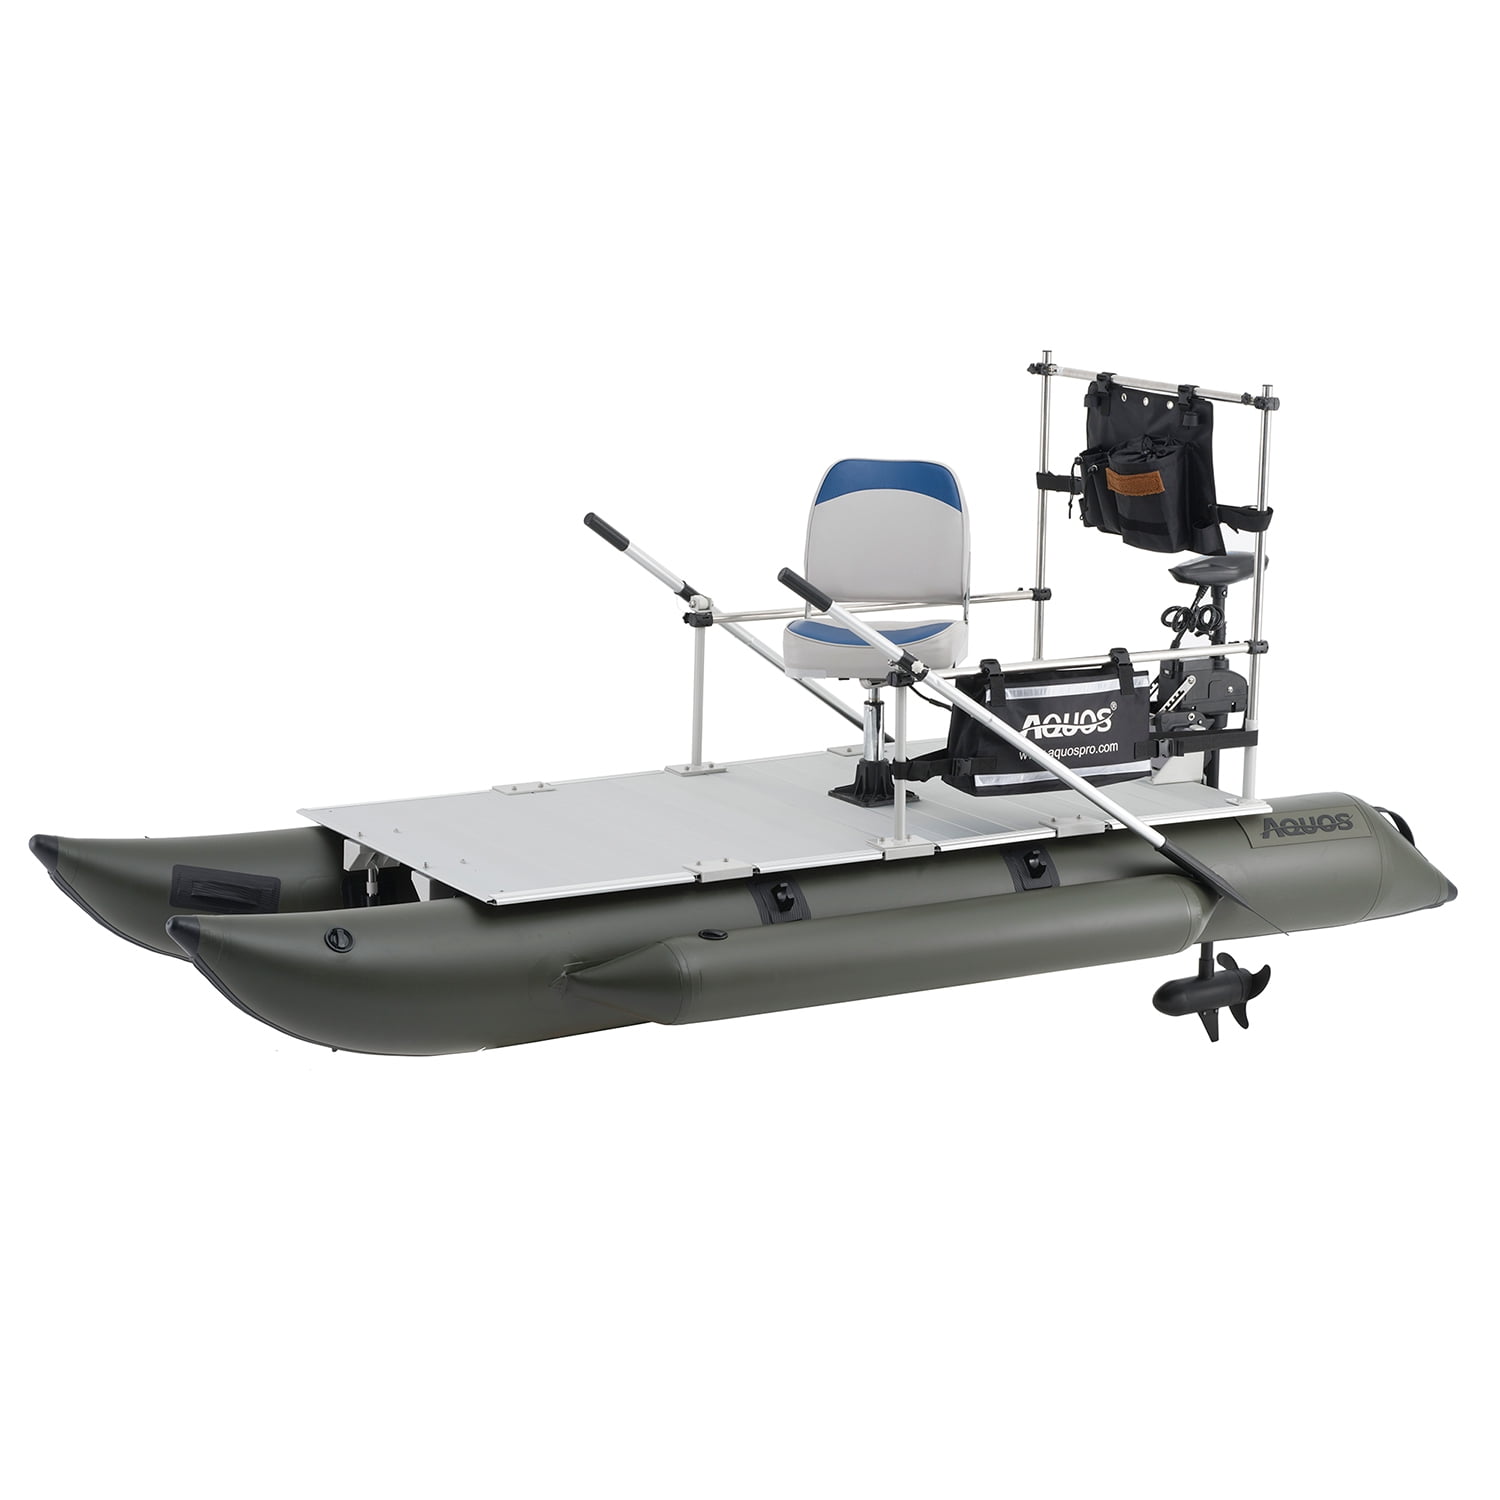 Top Rated Products in Boats & Water Sports